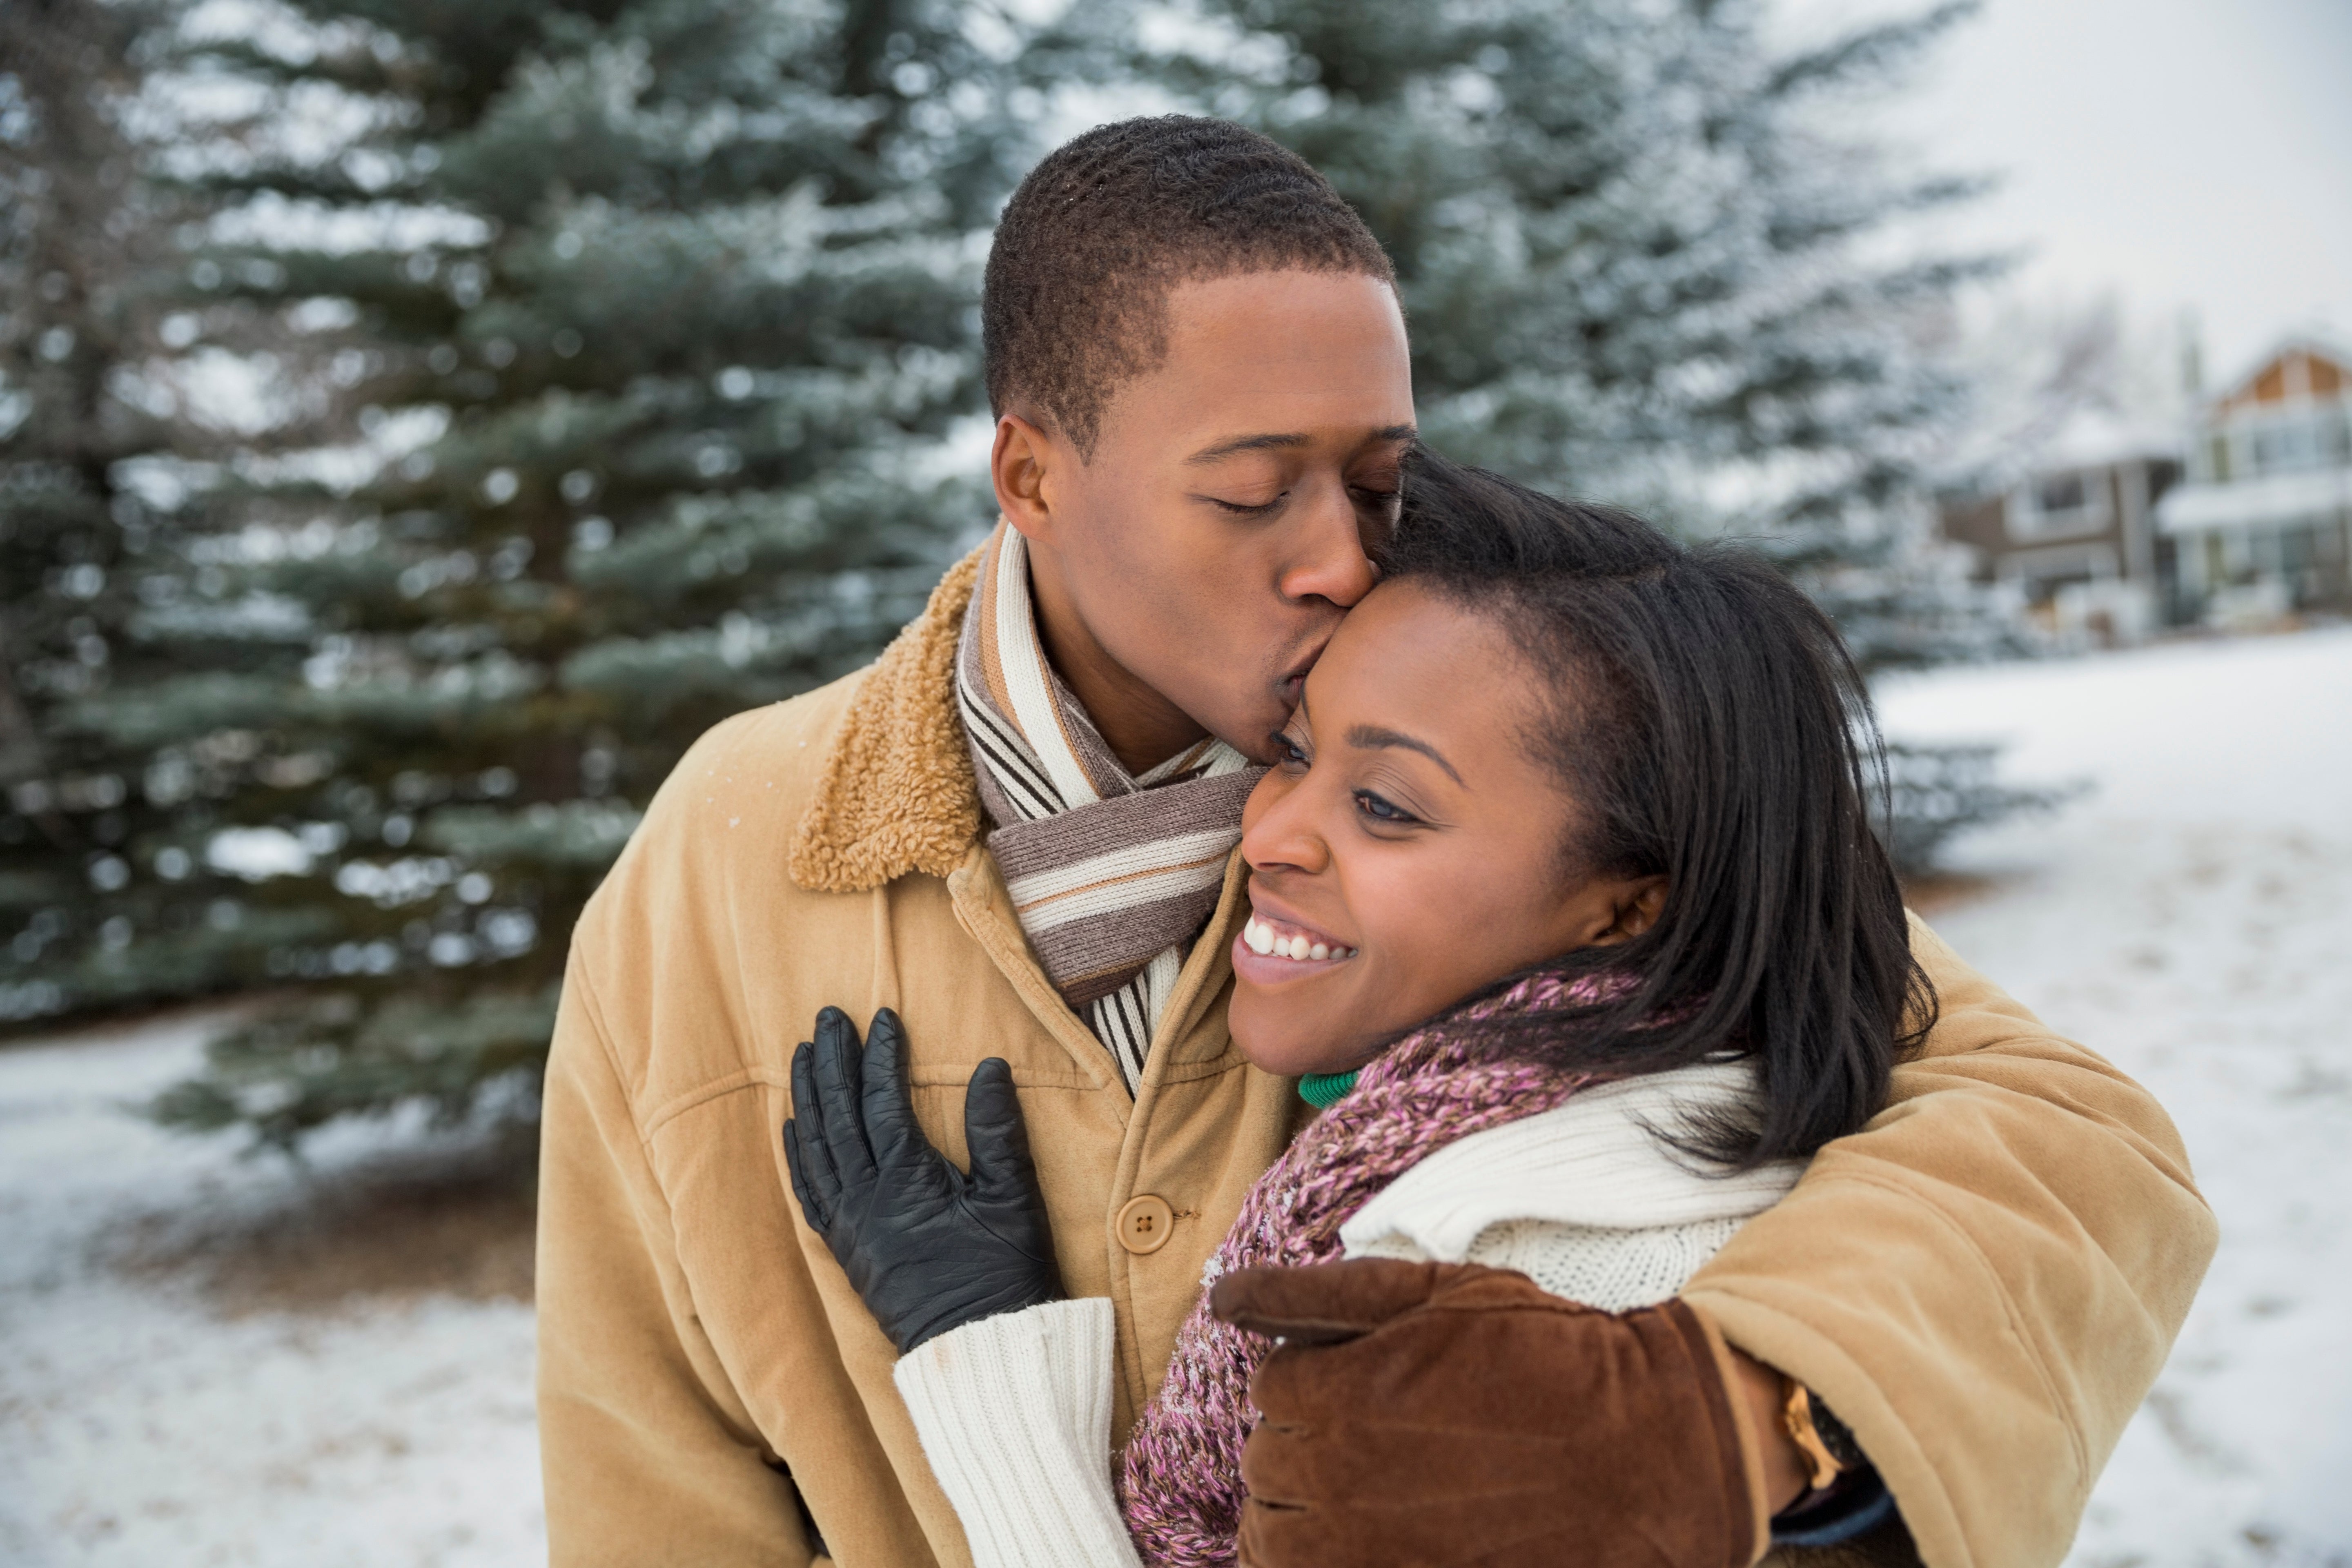 Not Sure He's All In? Here's Your Cuffing Season Survival Guide
